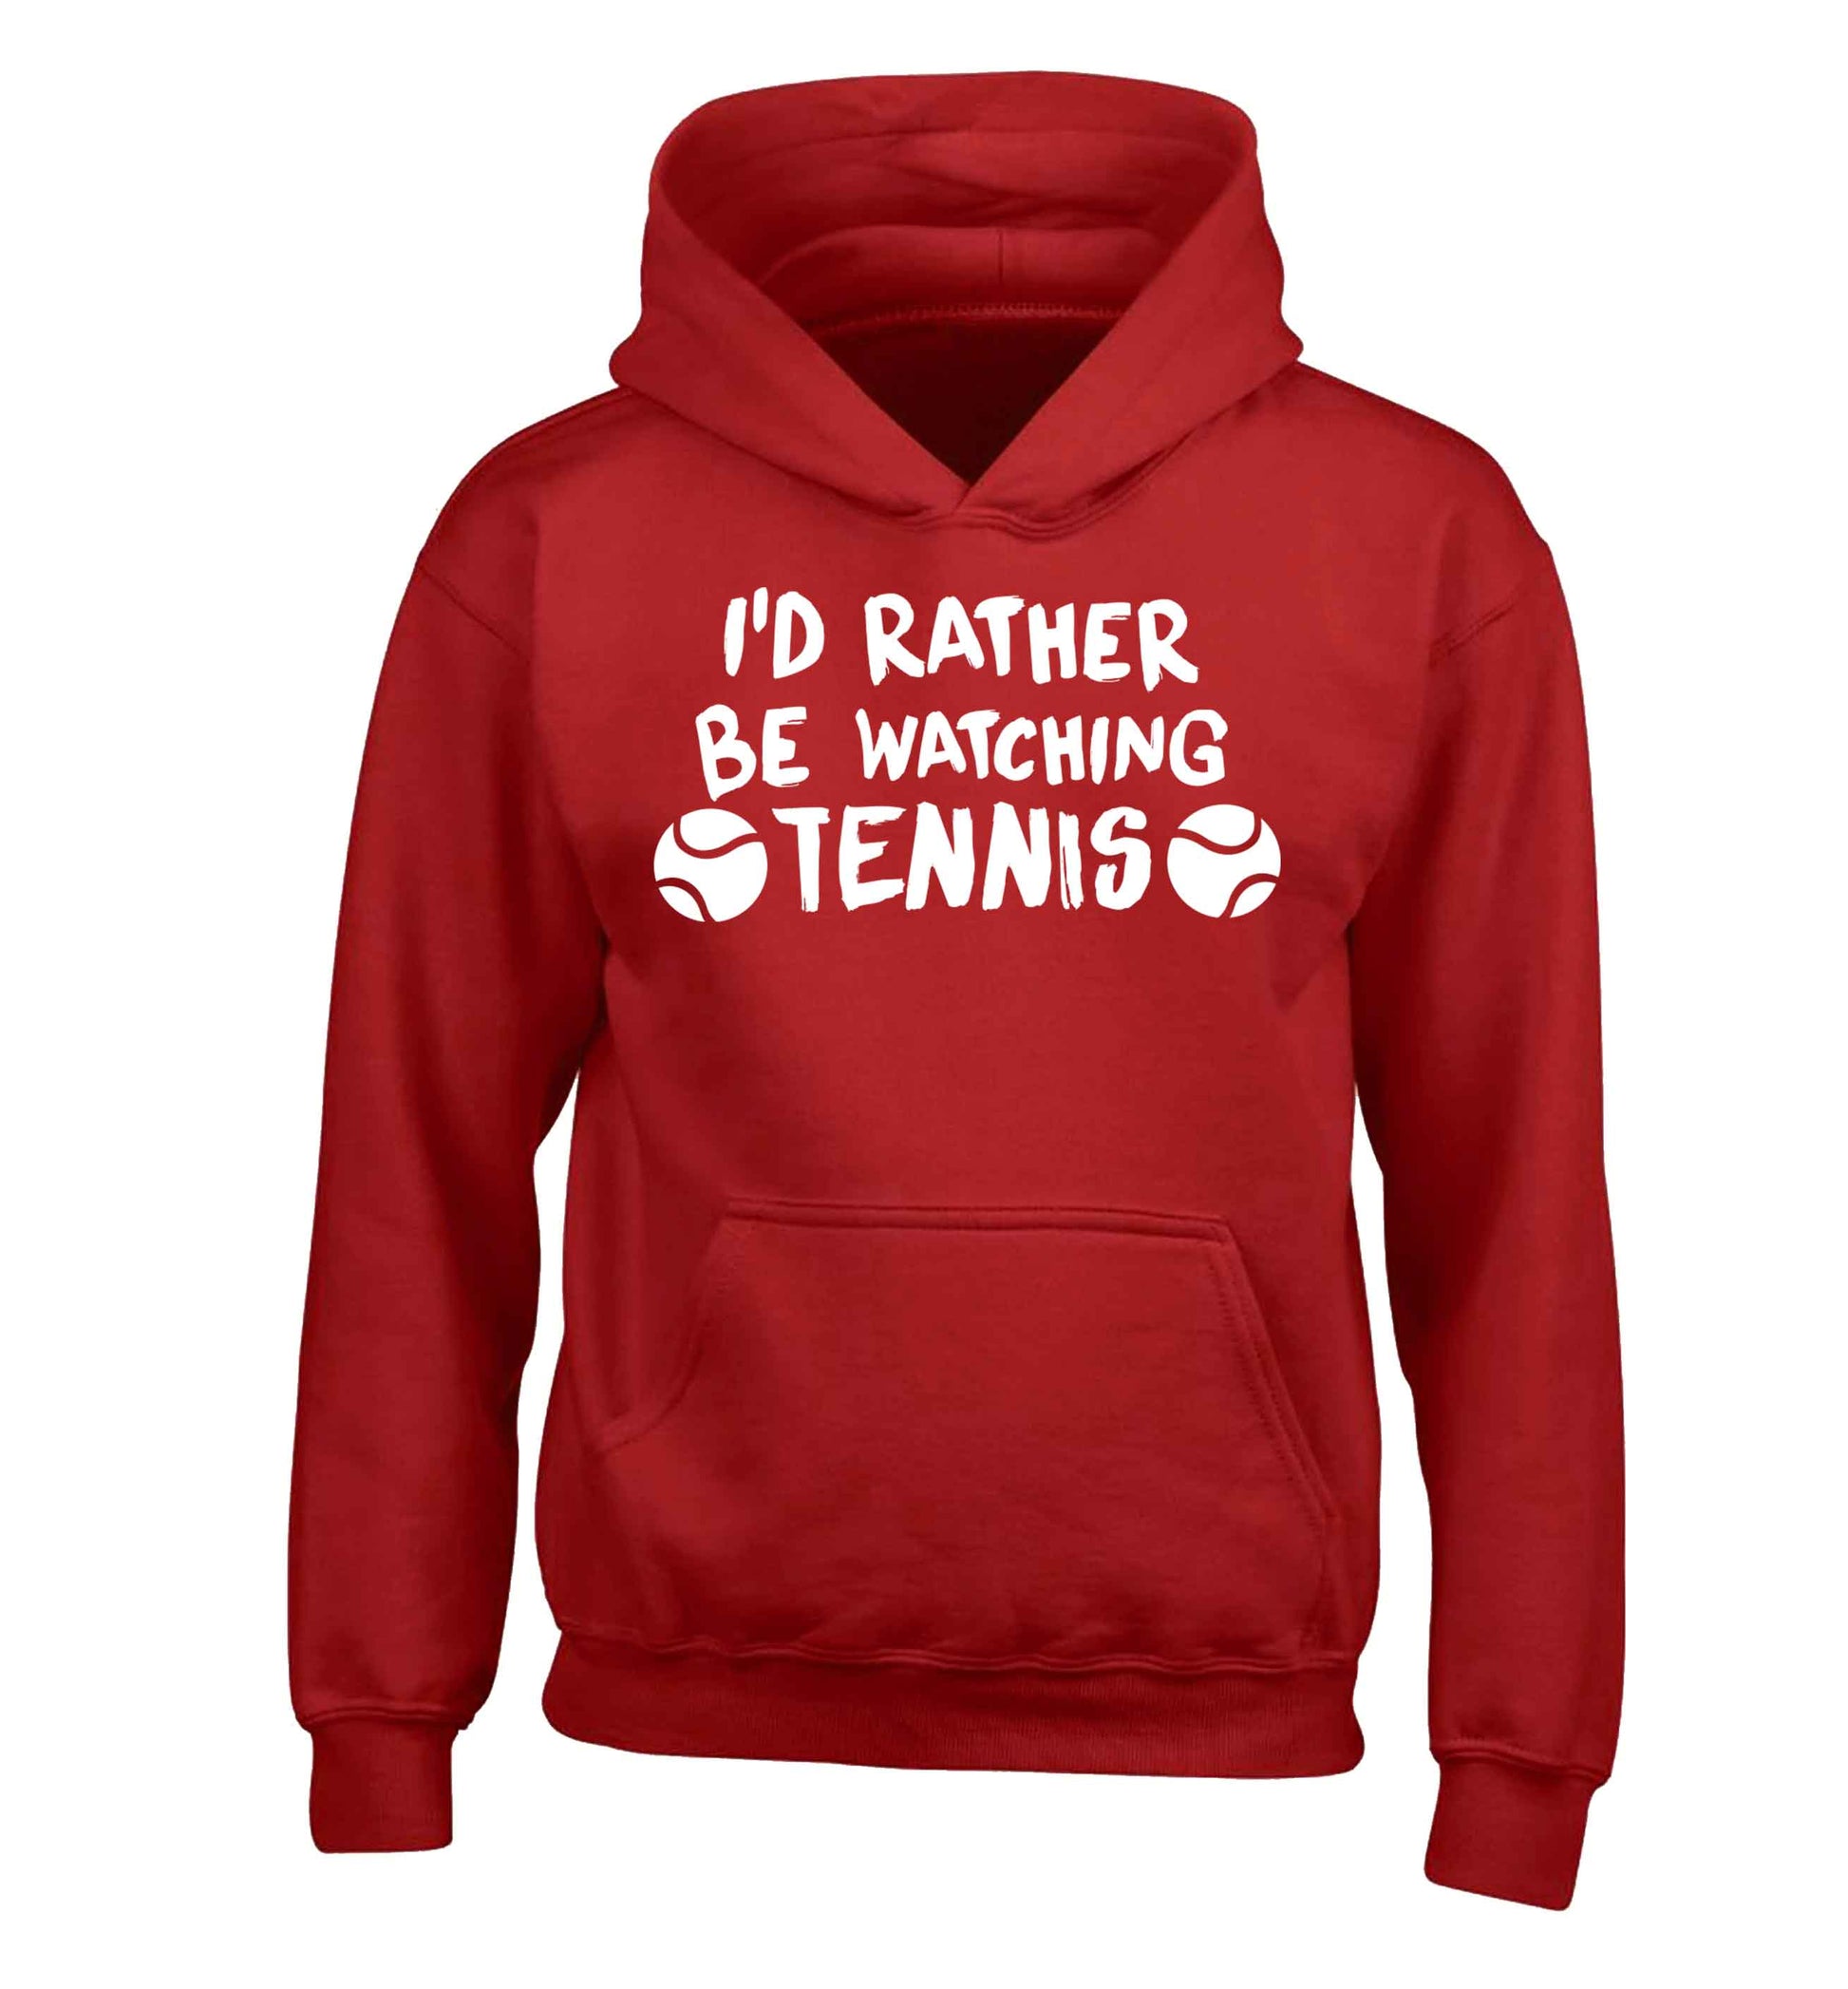 I'd rather be watching the tennis children's red hoodie 12-13 Years